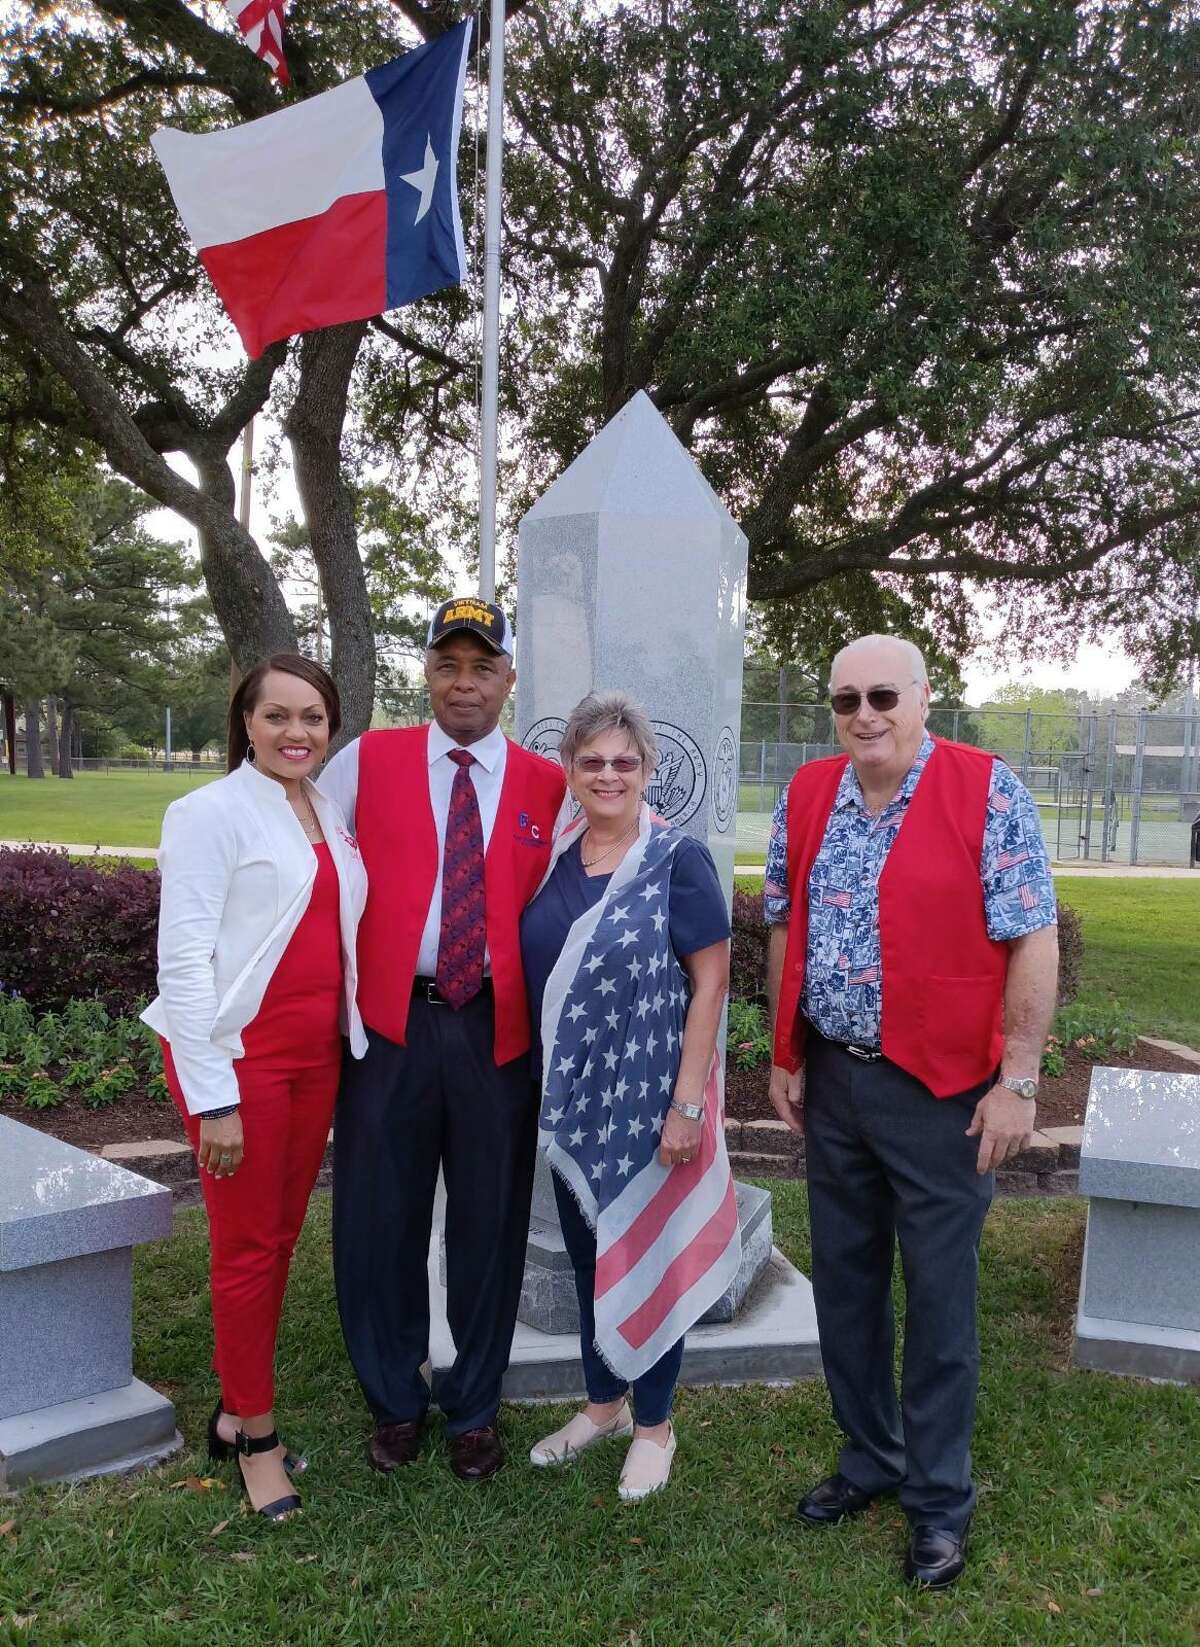 Crosby ISD Superintendent Paula Patterson, Chaplain Cedric Patterson, Monument Chairman Judy Culbreath, and Eastside Veterans President Bob Ward were all present at the dedication ceremony for the new Eastside Veterans Memorial in Crosby Park.